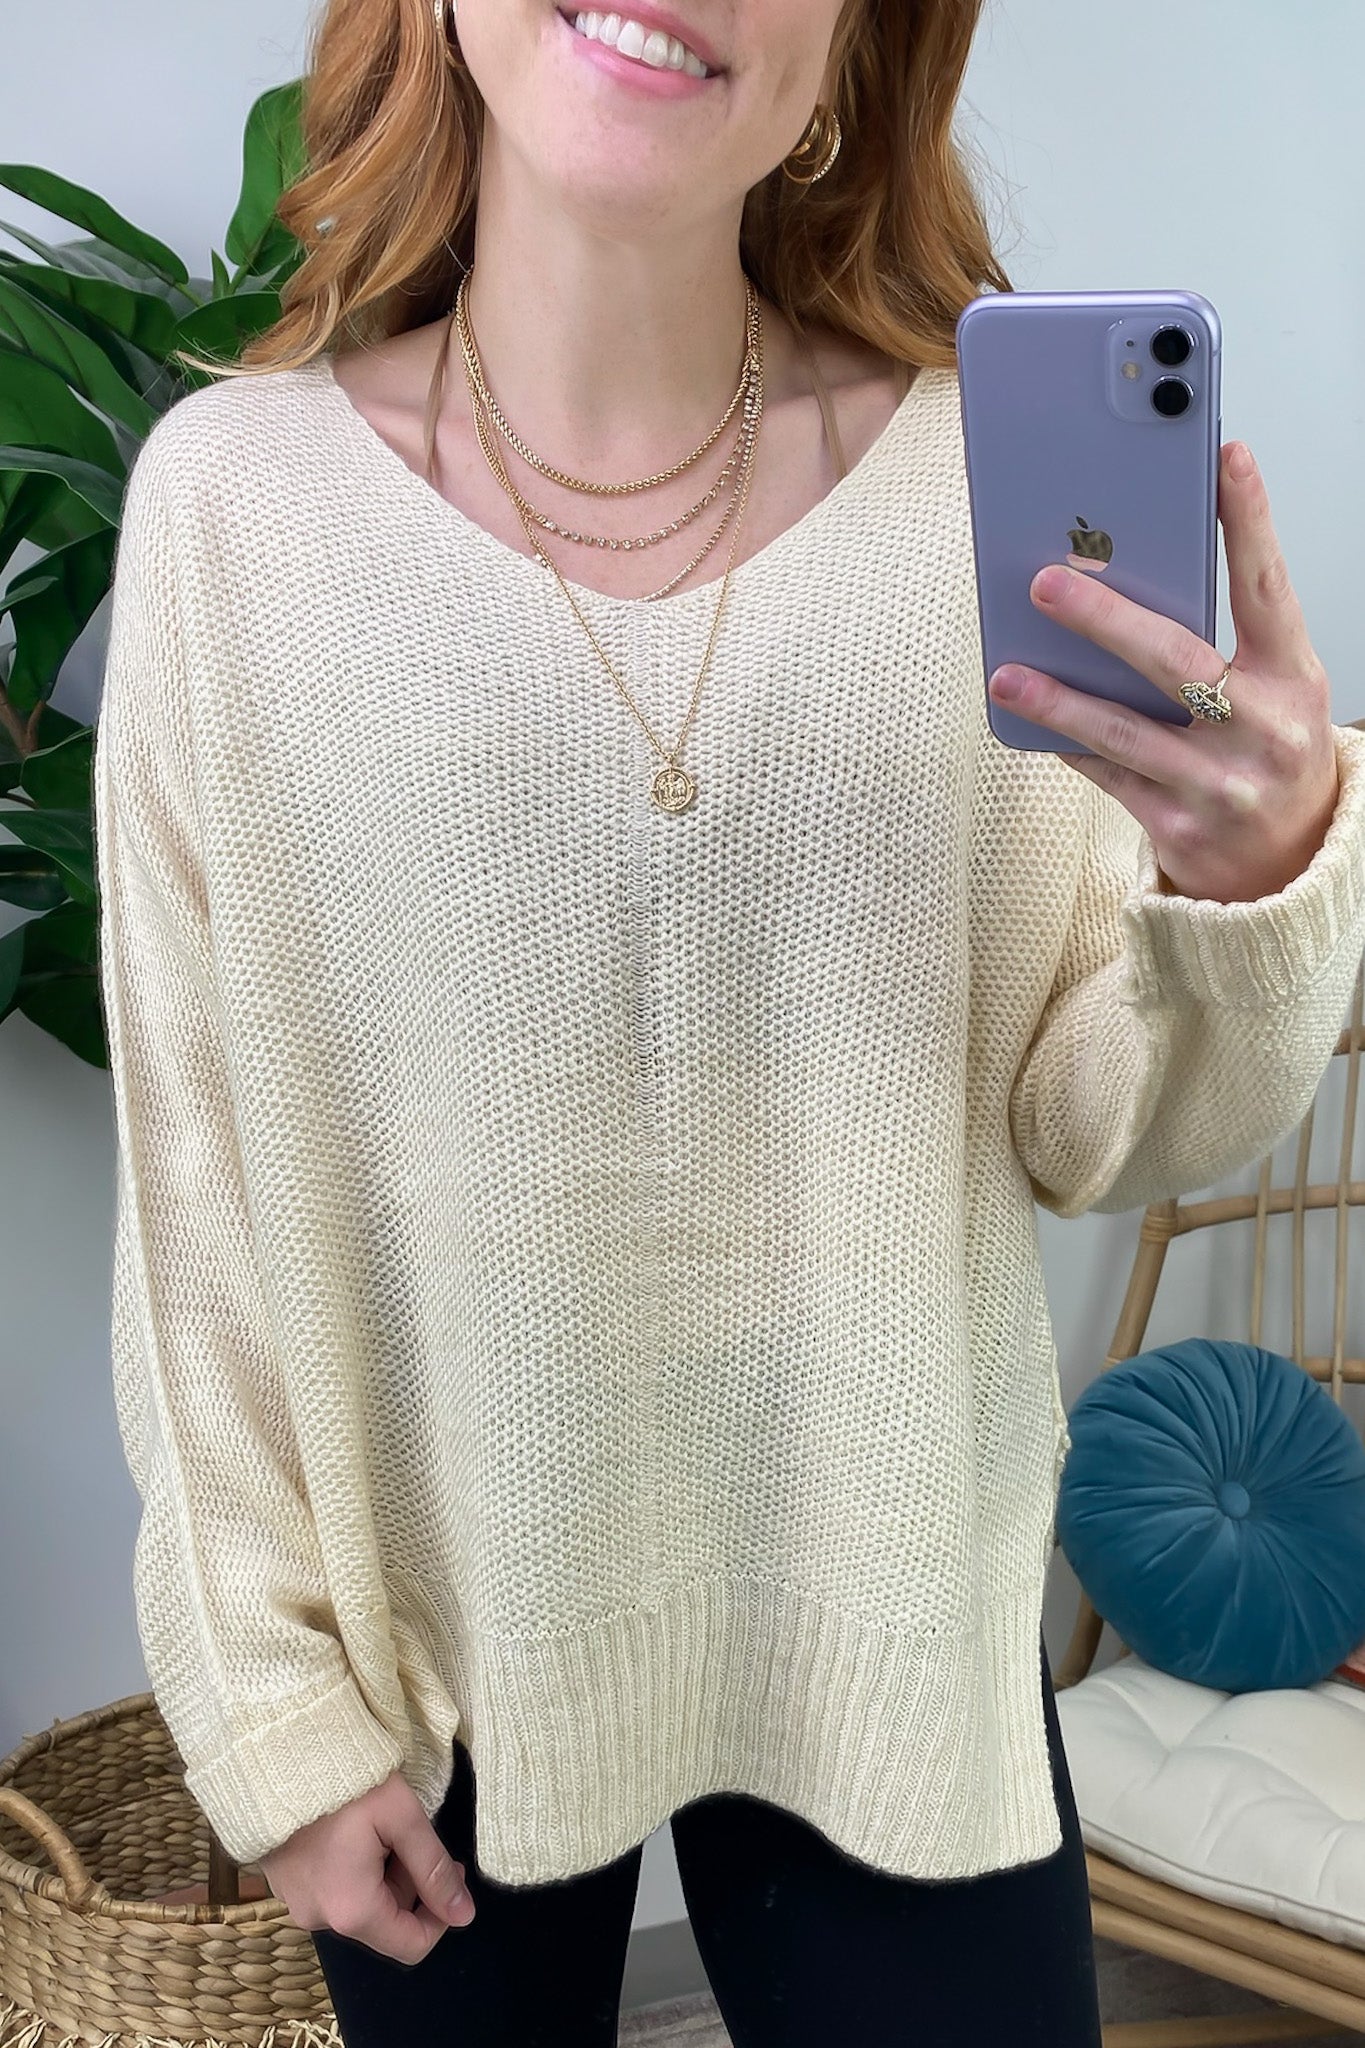  Shaely High Low Knit Sweater - FINAL SALE - Madison and Mallory